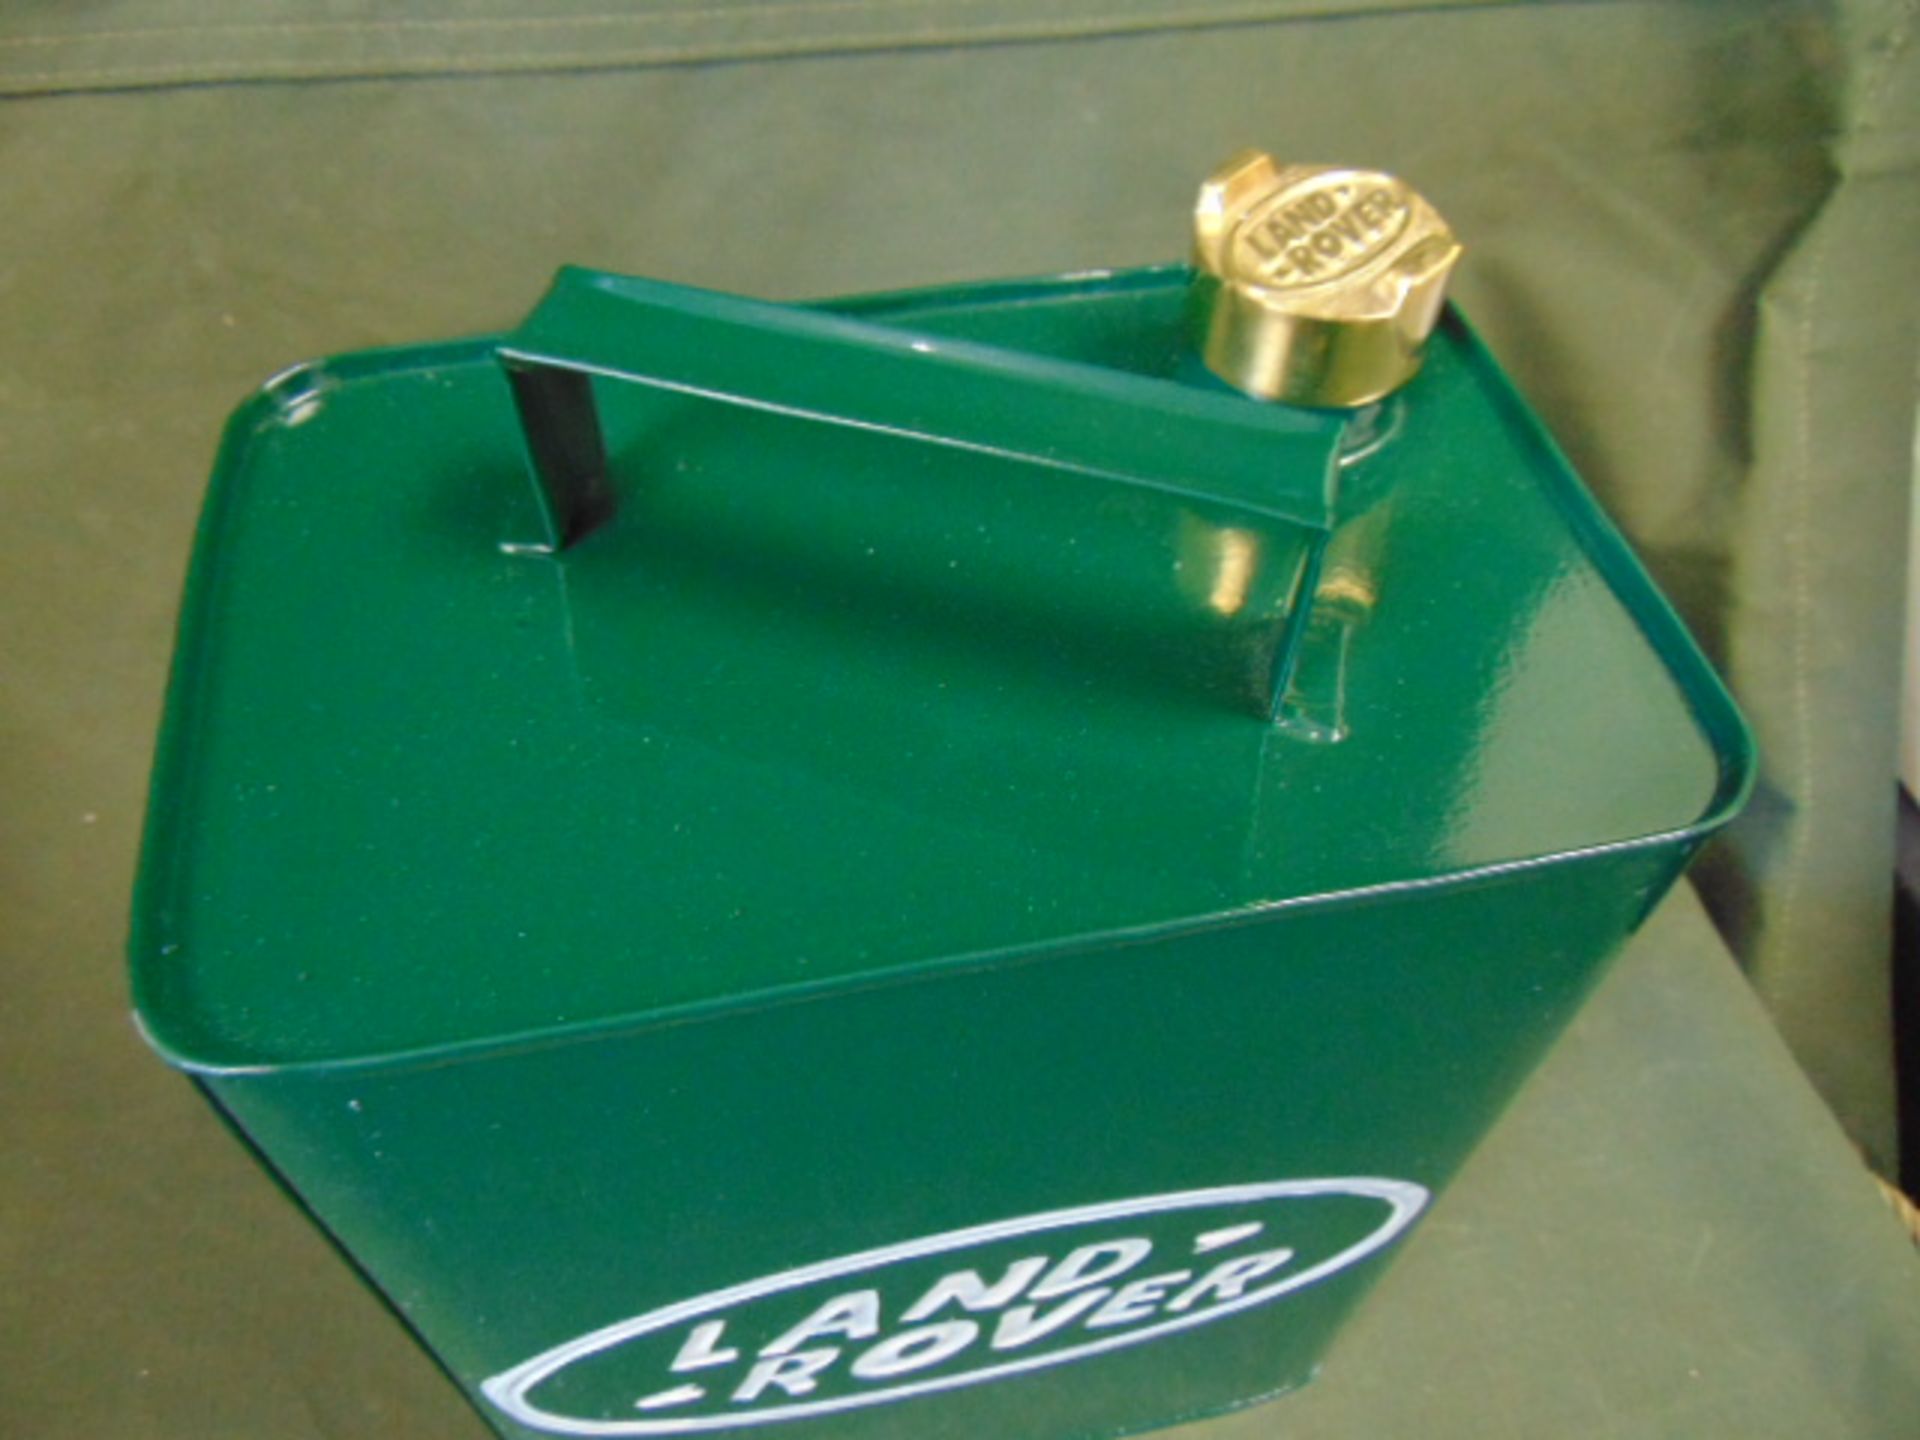 Reproduction Land Rover Branded Oil Can - Image 3 of 4